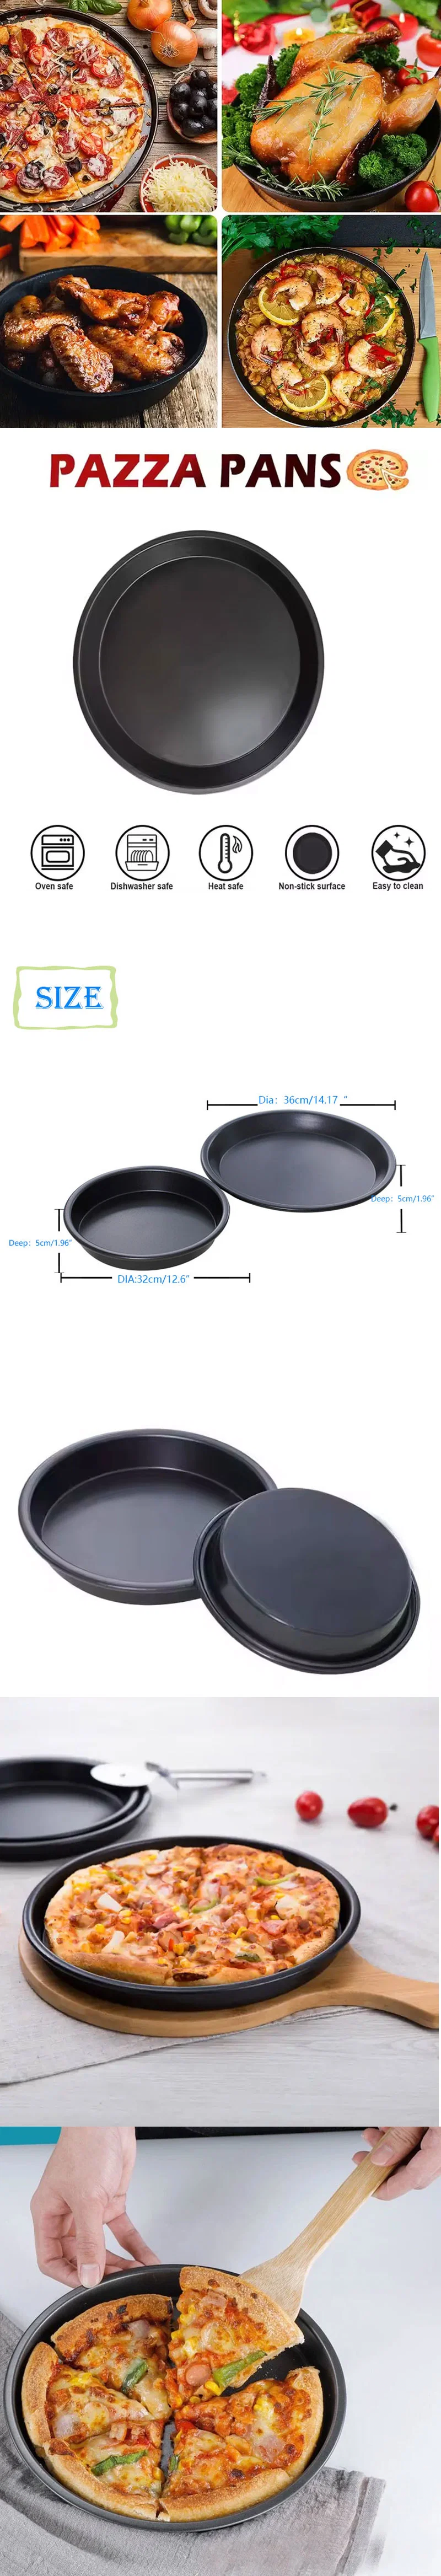 Home Kitchen Hardening Nonstick Carbon Steel Round Pizza Pan Deep Dish Oven Tray Homemade Pizza Baking Sheet